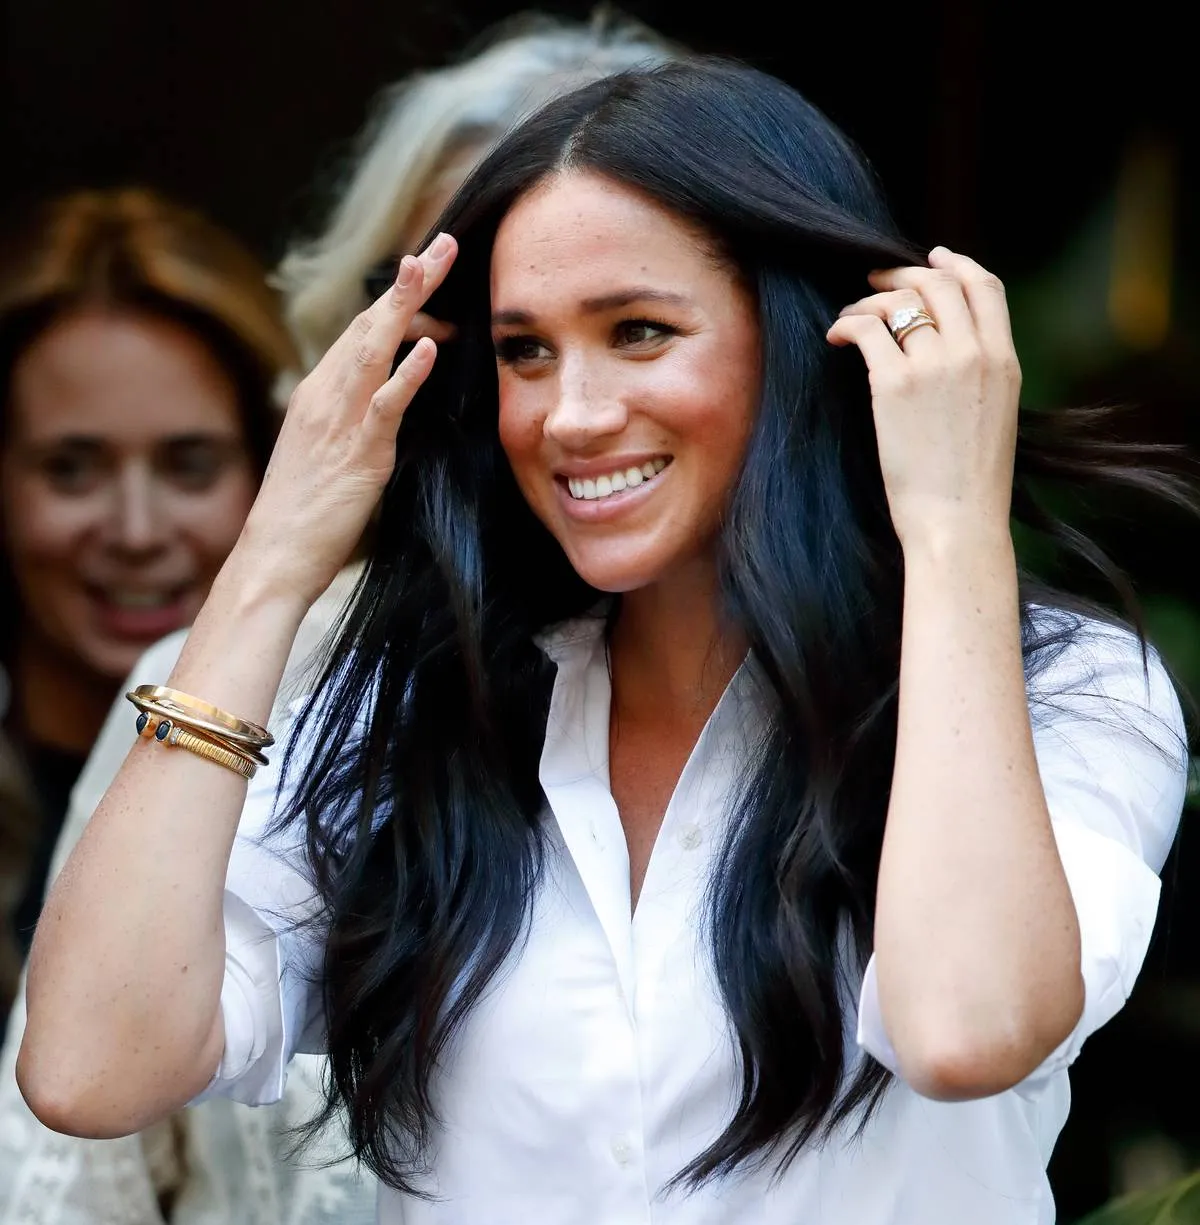 Meghan Markle's bracelets are seen as she moves her hair out of her face.